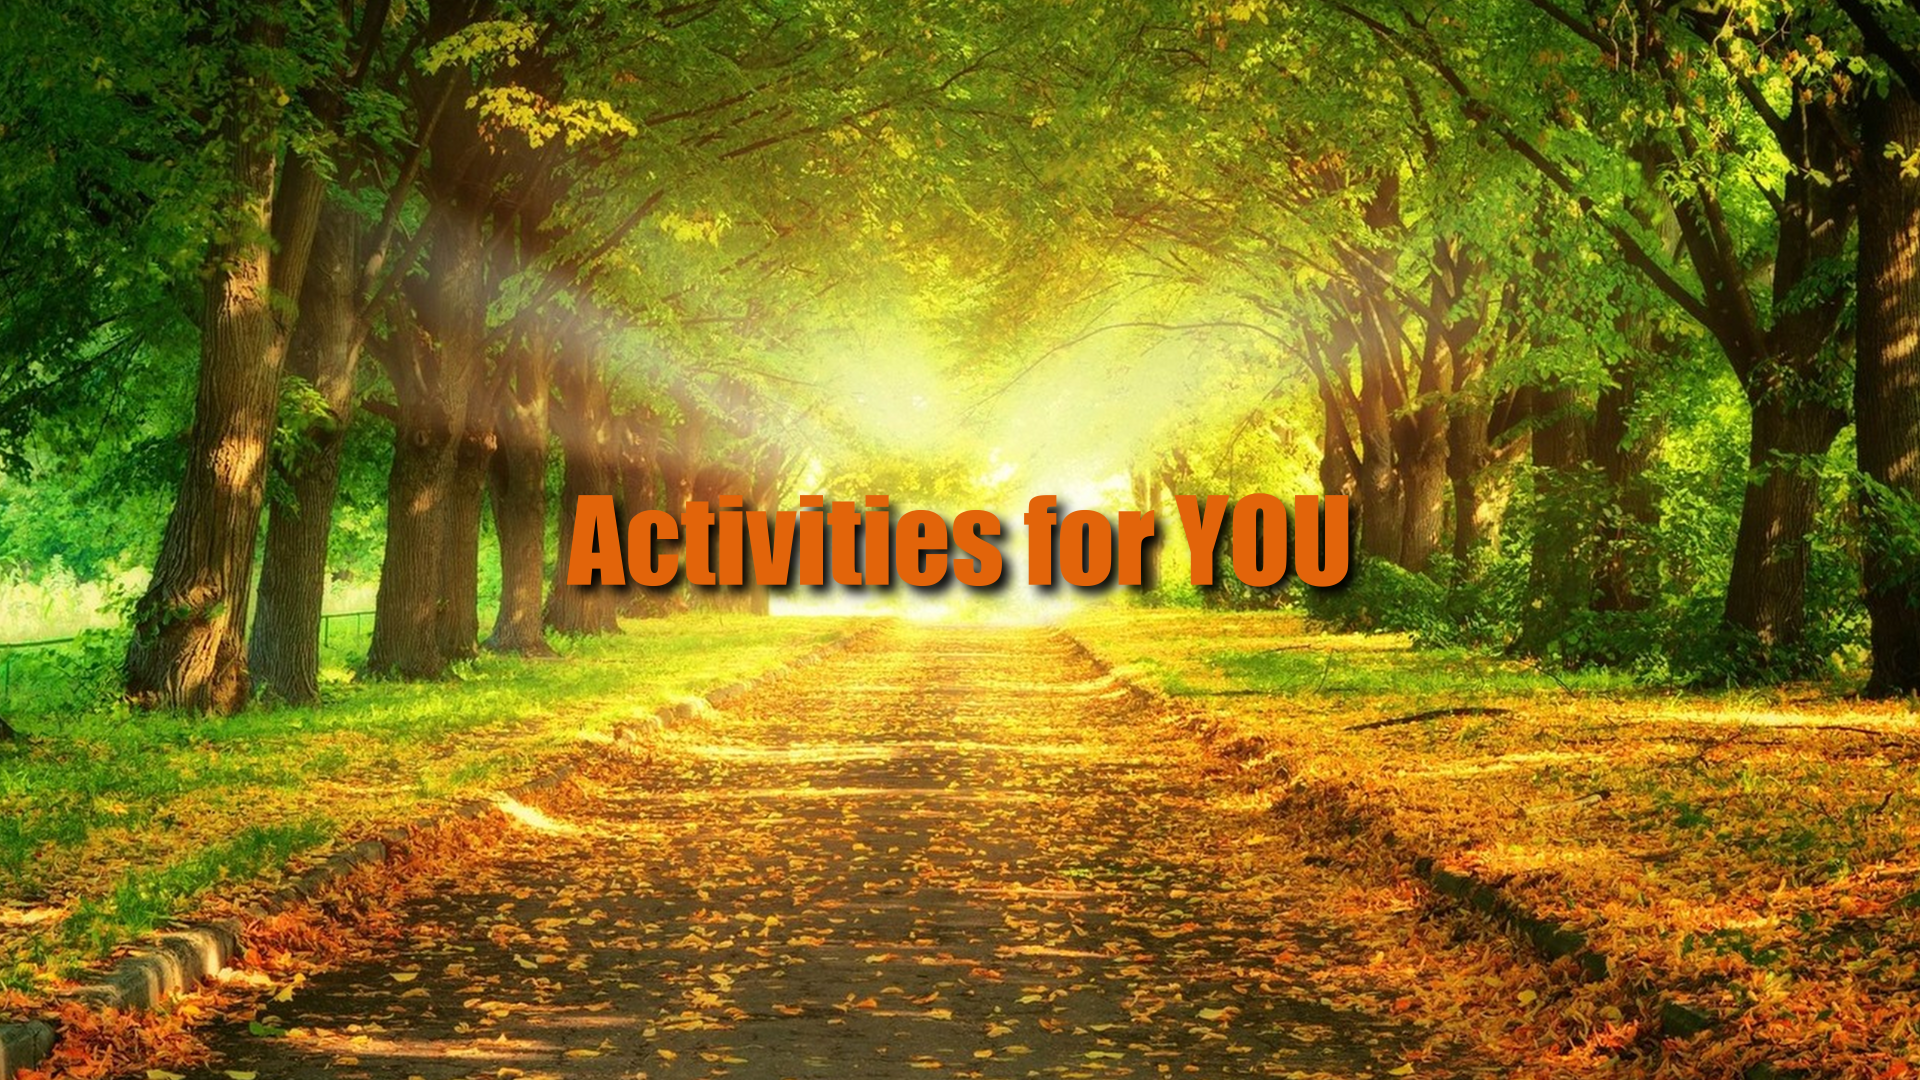 Activities for YOU